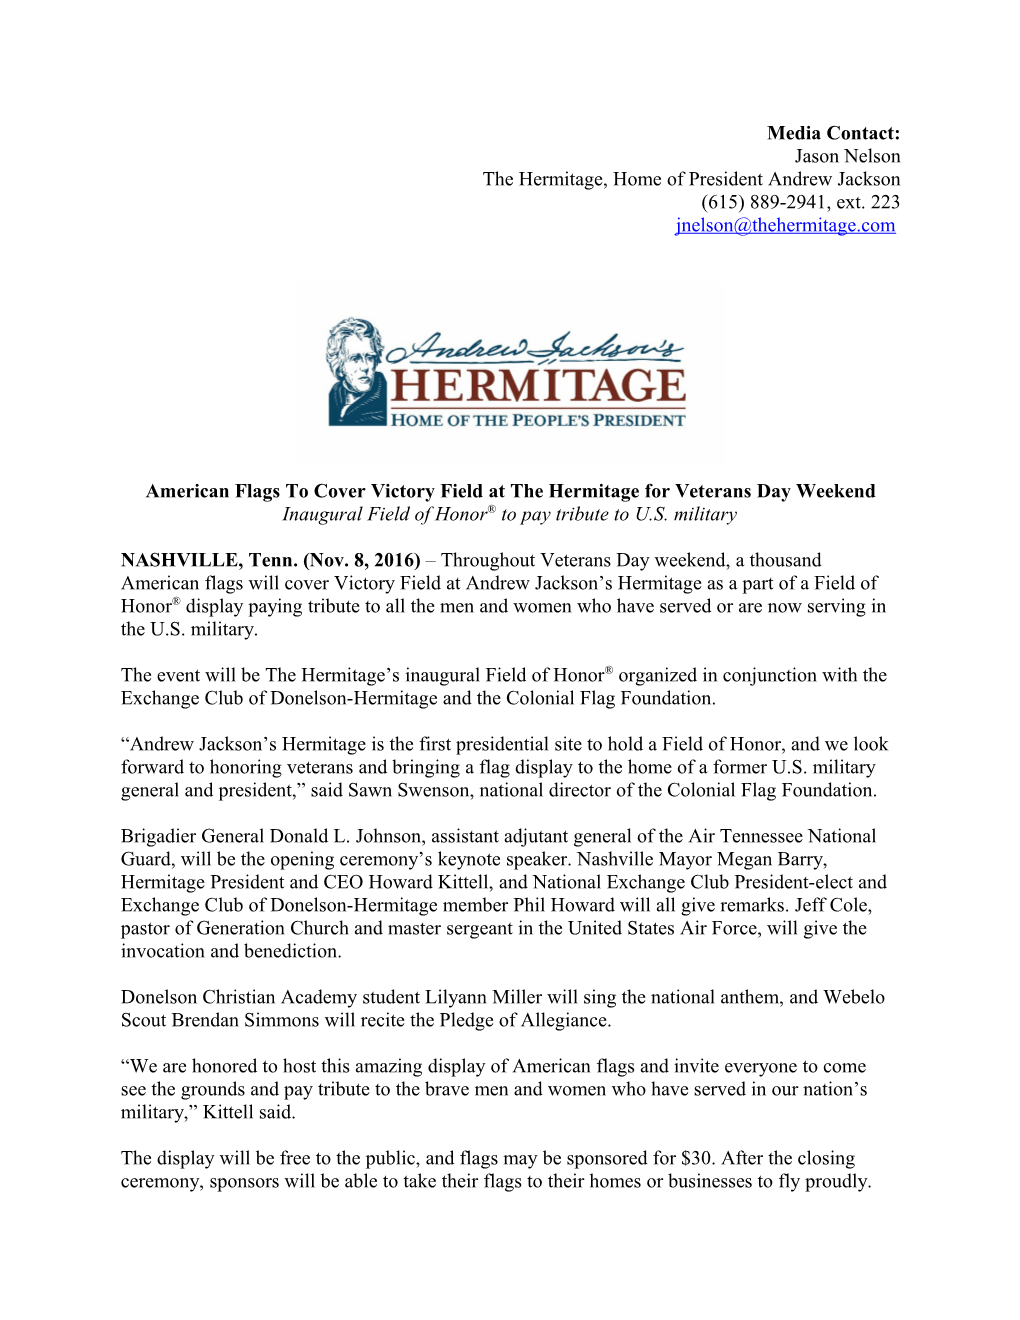 American Flags to Cover Victory Field at the Hermitage for Veterans Day Weekend